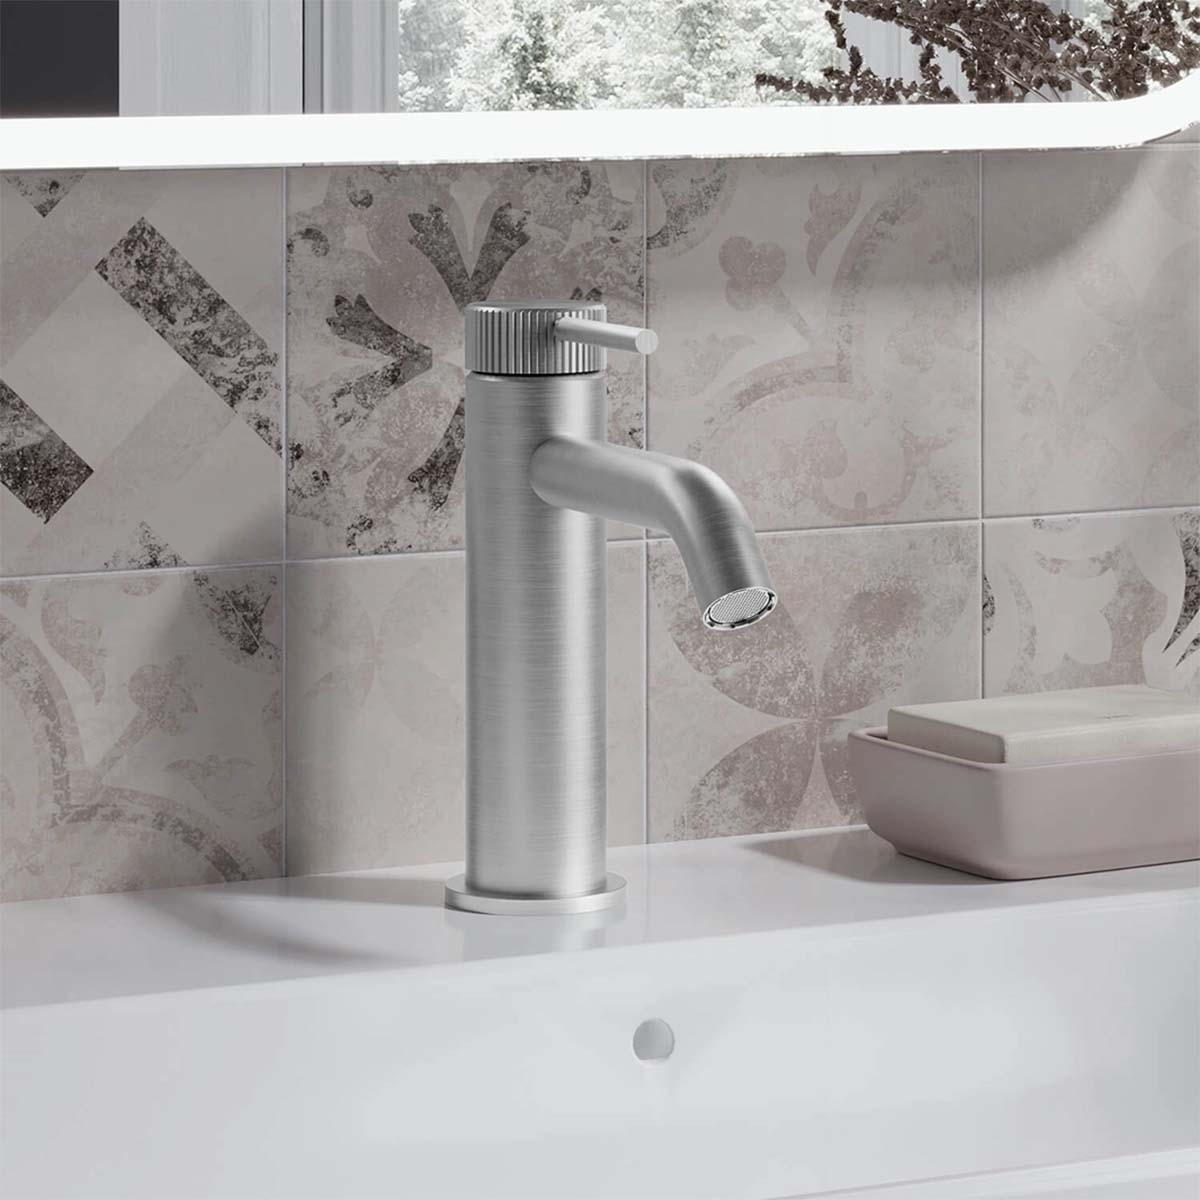 Crosswater 3ONE6 Basin Mixer Tap Monobloc - 316 Stainless Steel Lifestyle